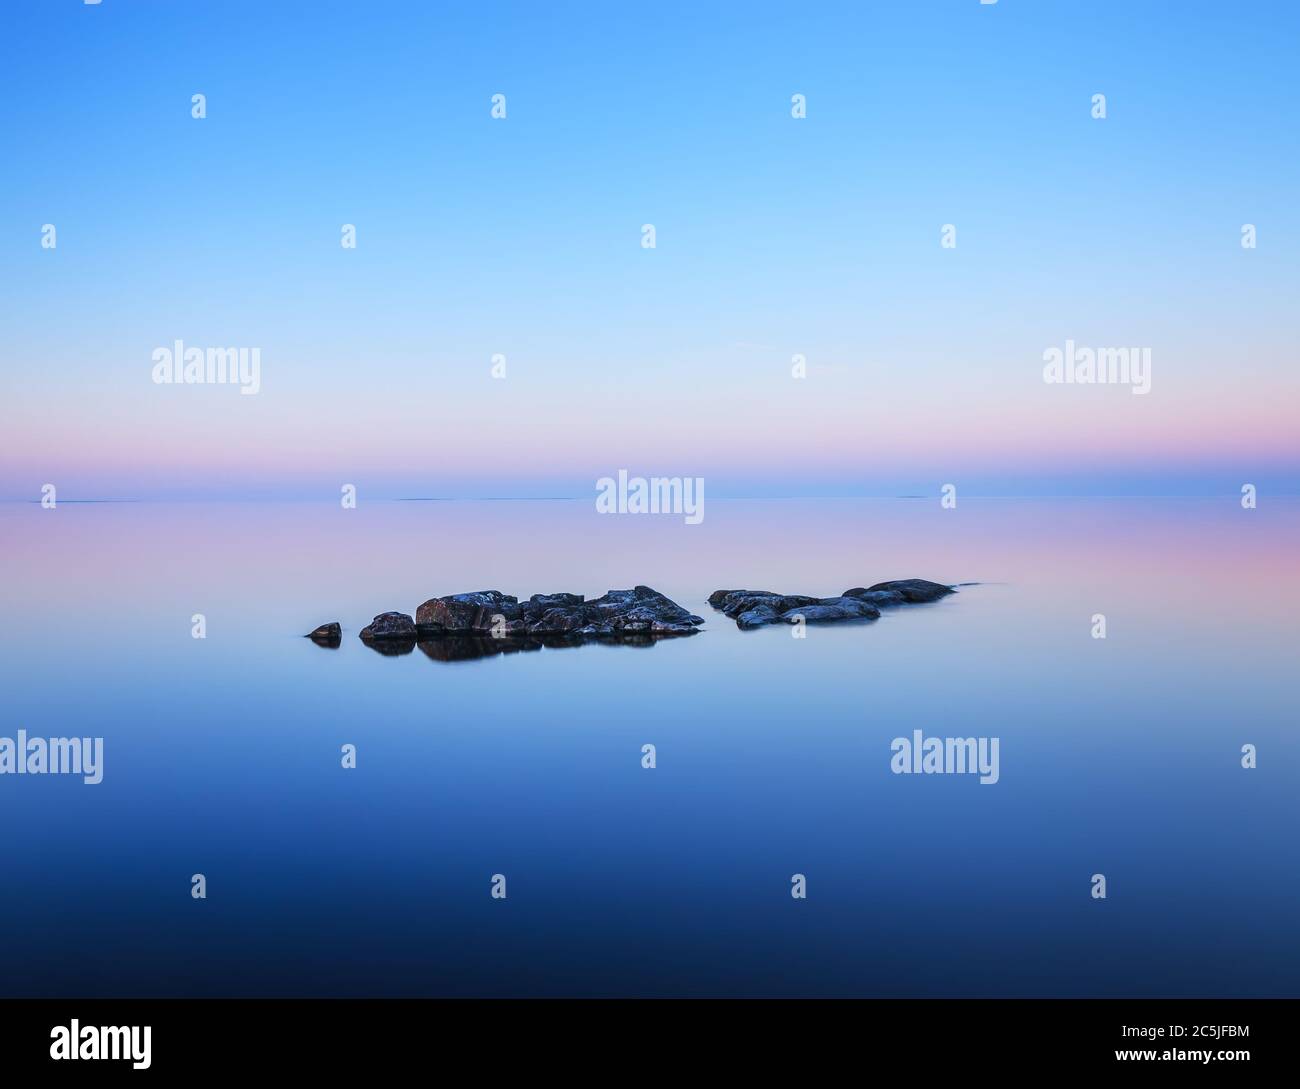 Tranquil minimalist landscape with rocks on the smooth surface of the lake with calm water with horizon with clear blue sky in twilight. Stock Photo